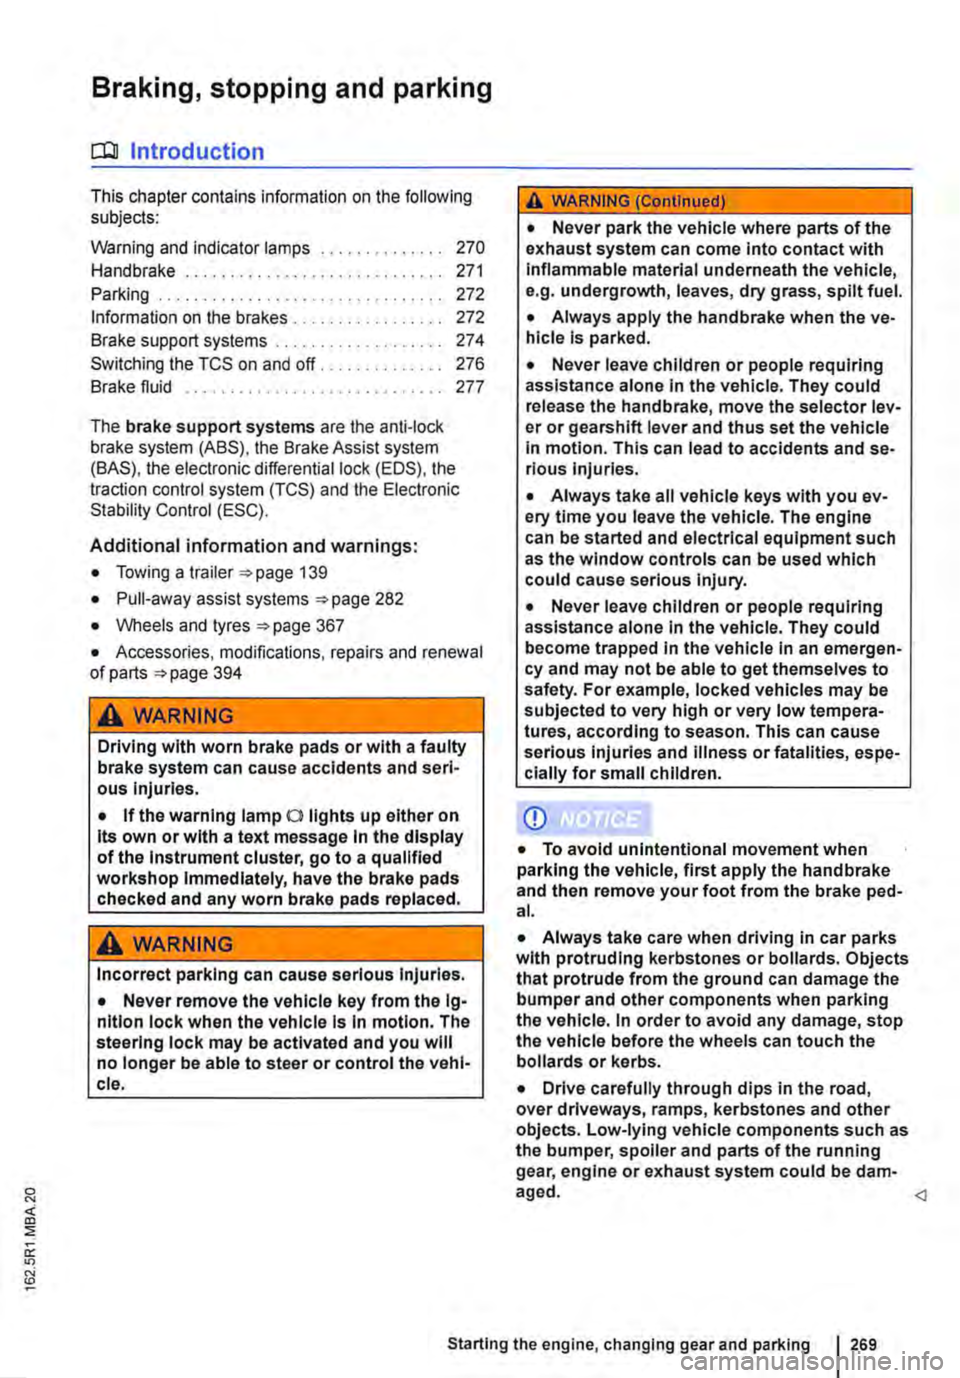 VOLKSWAGEN TRANSPORTER 2013  Owners Manual Braking, stopping and parking 
COl Introduction 
This chapter contains information on the following subjects: 
Warning and indicator lamps Handbrake ............................ . 
Parking . . . . . .